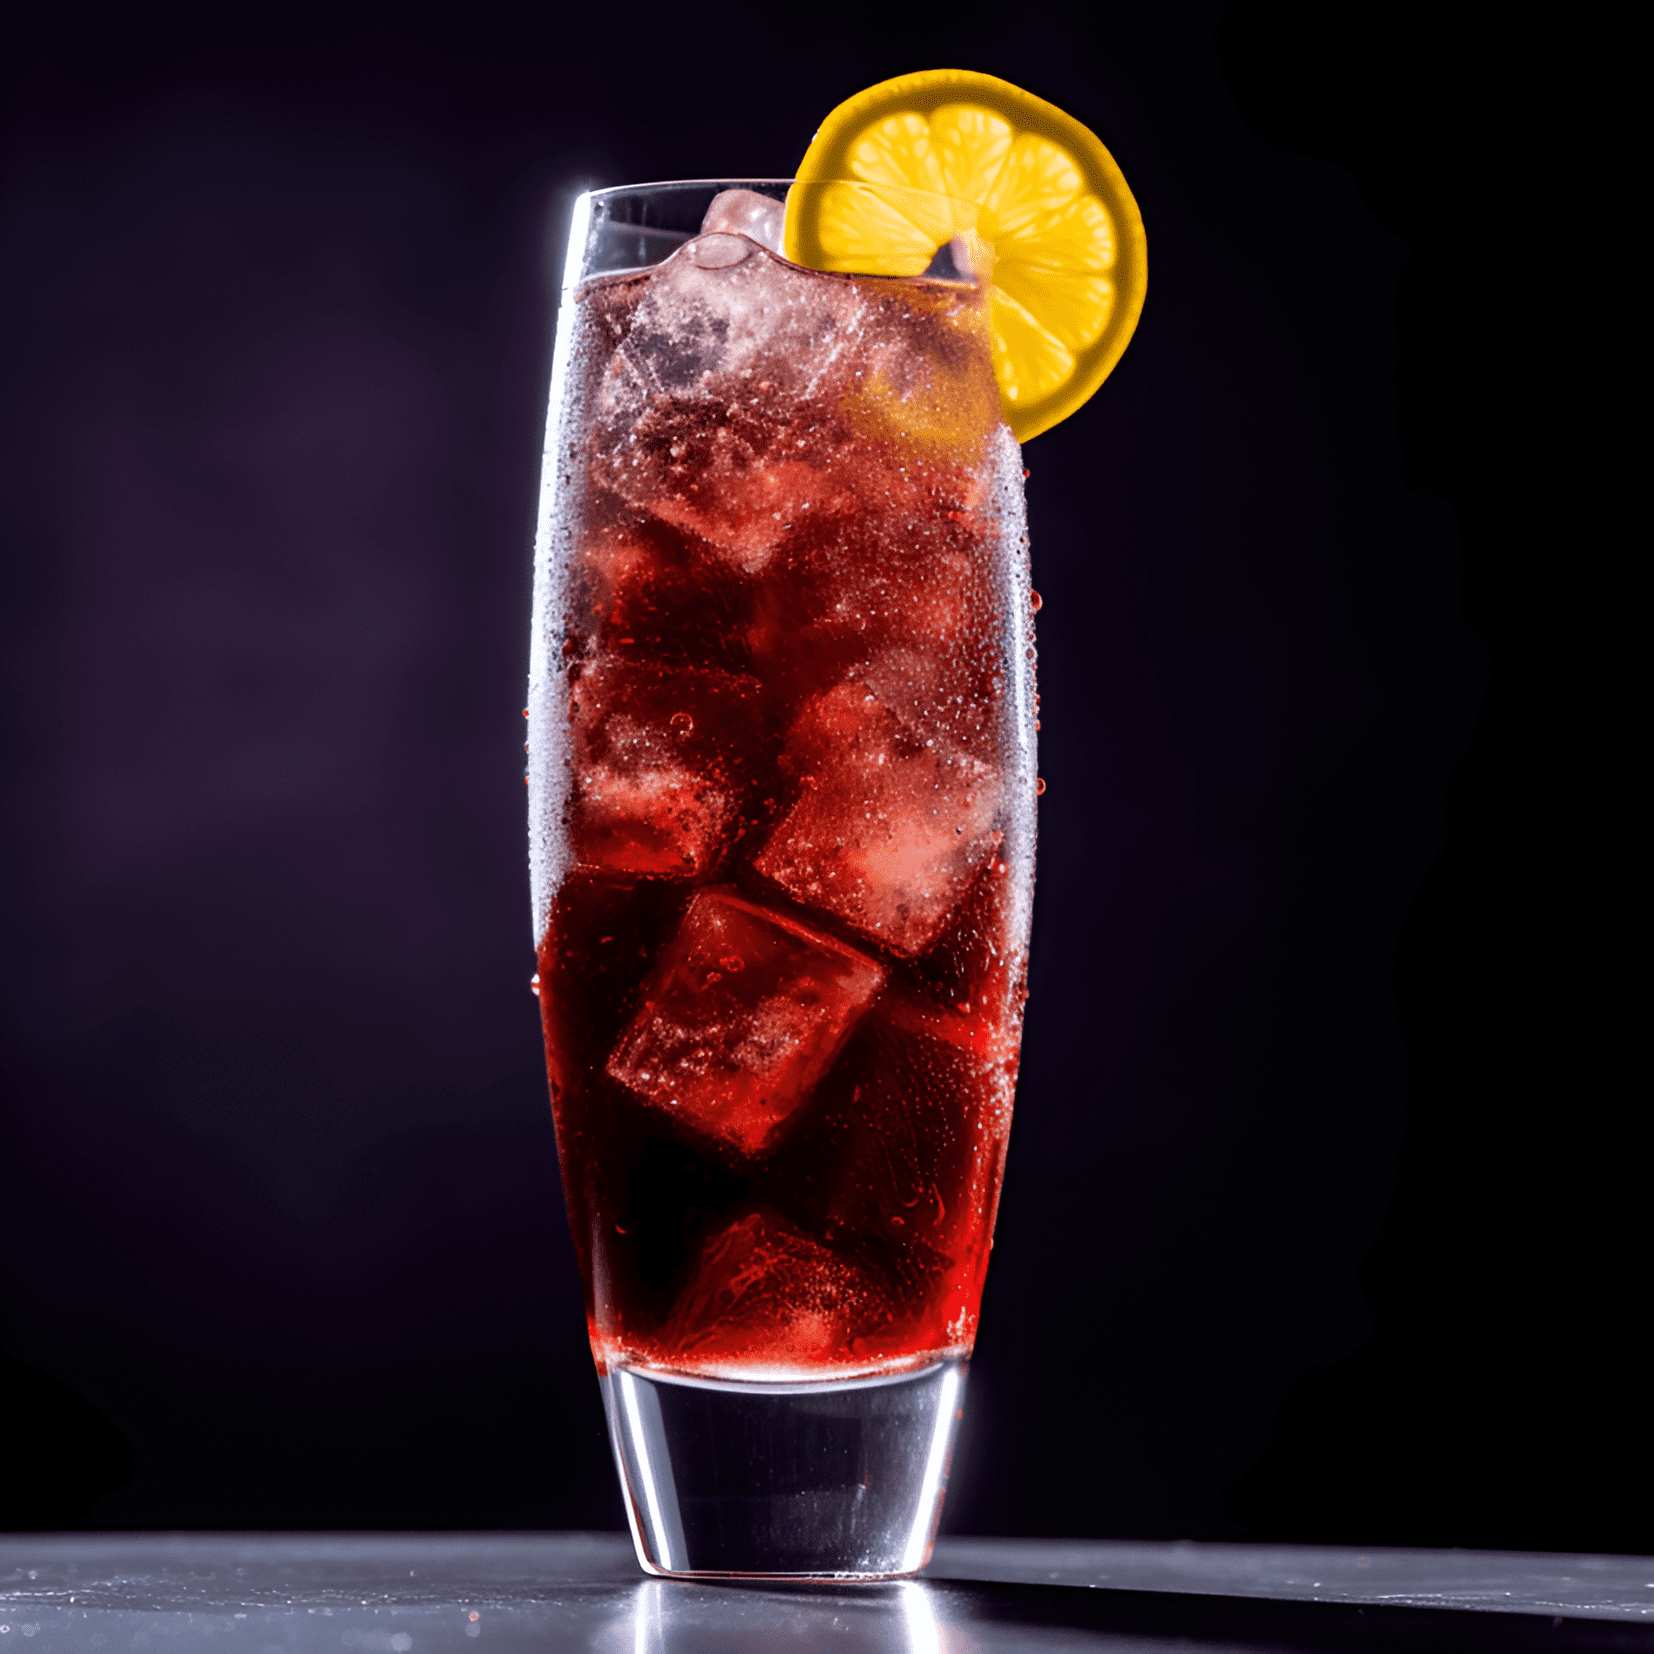 Calimocho Cocktail Recipe - The Calimocho cocktail has a unique taste that is both sweet and slightly tangy. The red wine provides a fruity and robust flavor, while the cola adds a bubbly sweetness and a hint of caramel. The combination creates a well-balanced and easy-to-drink cocktail.